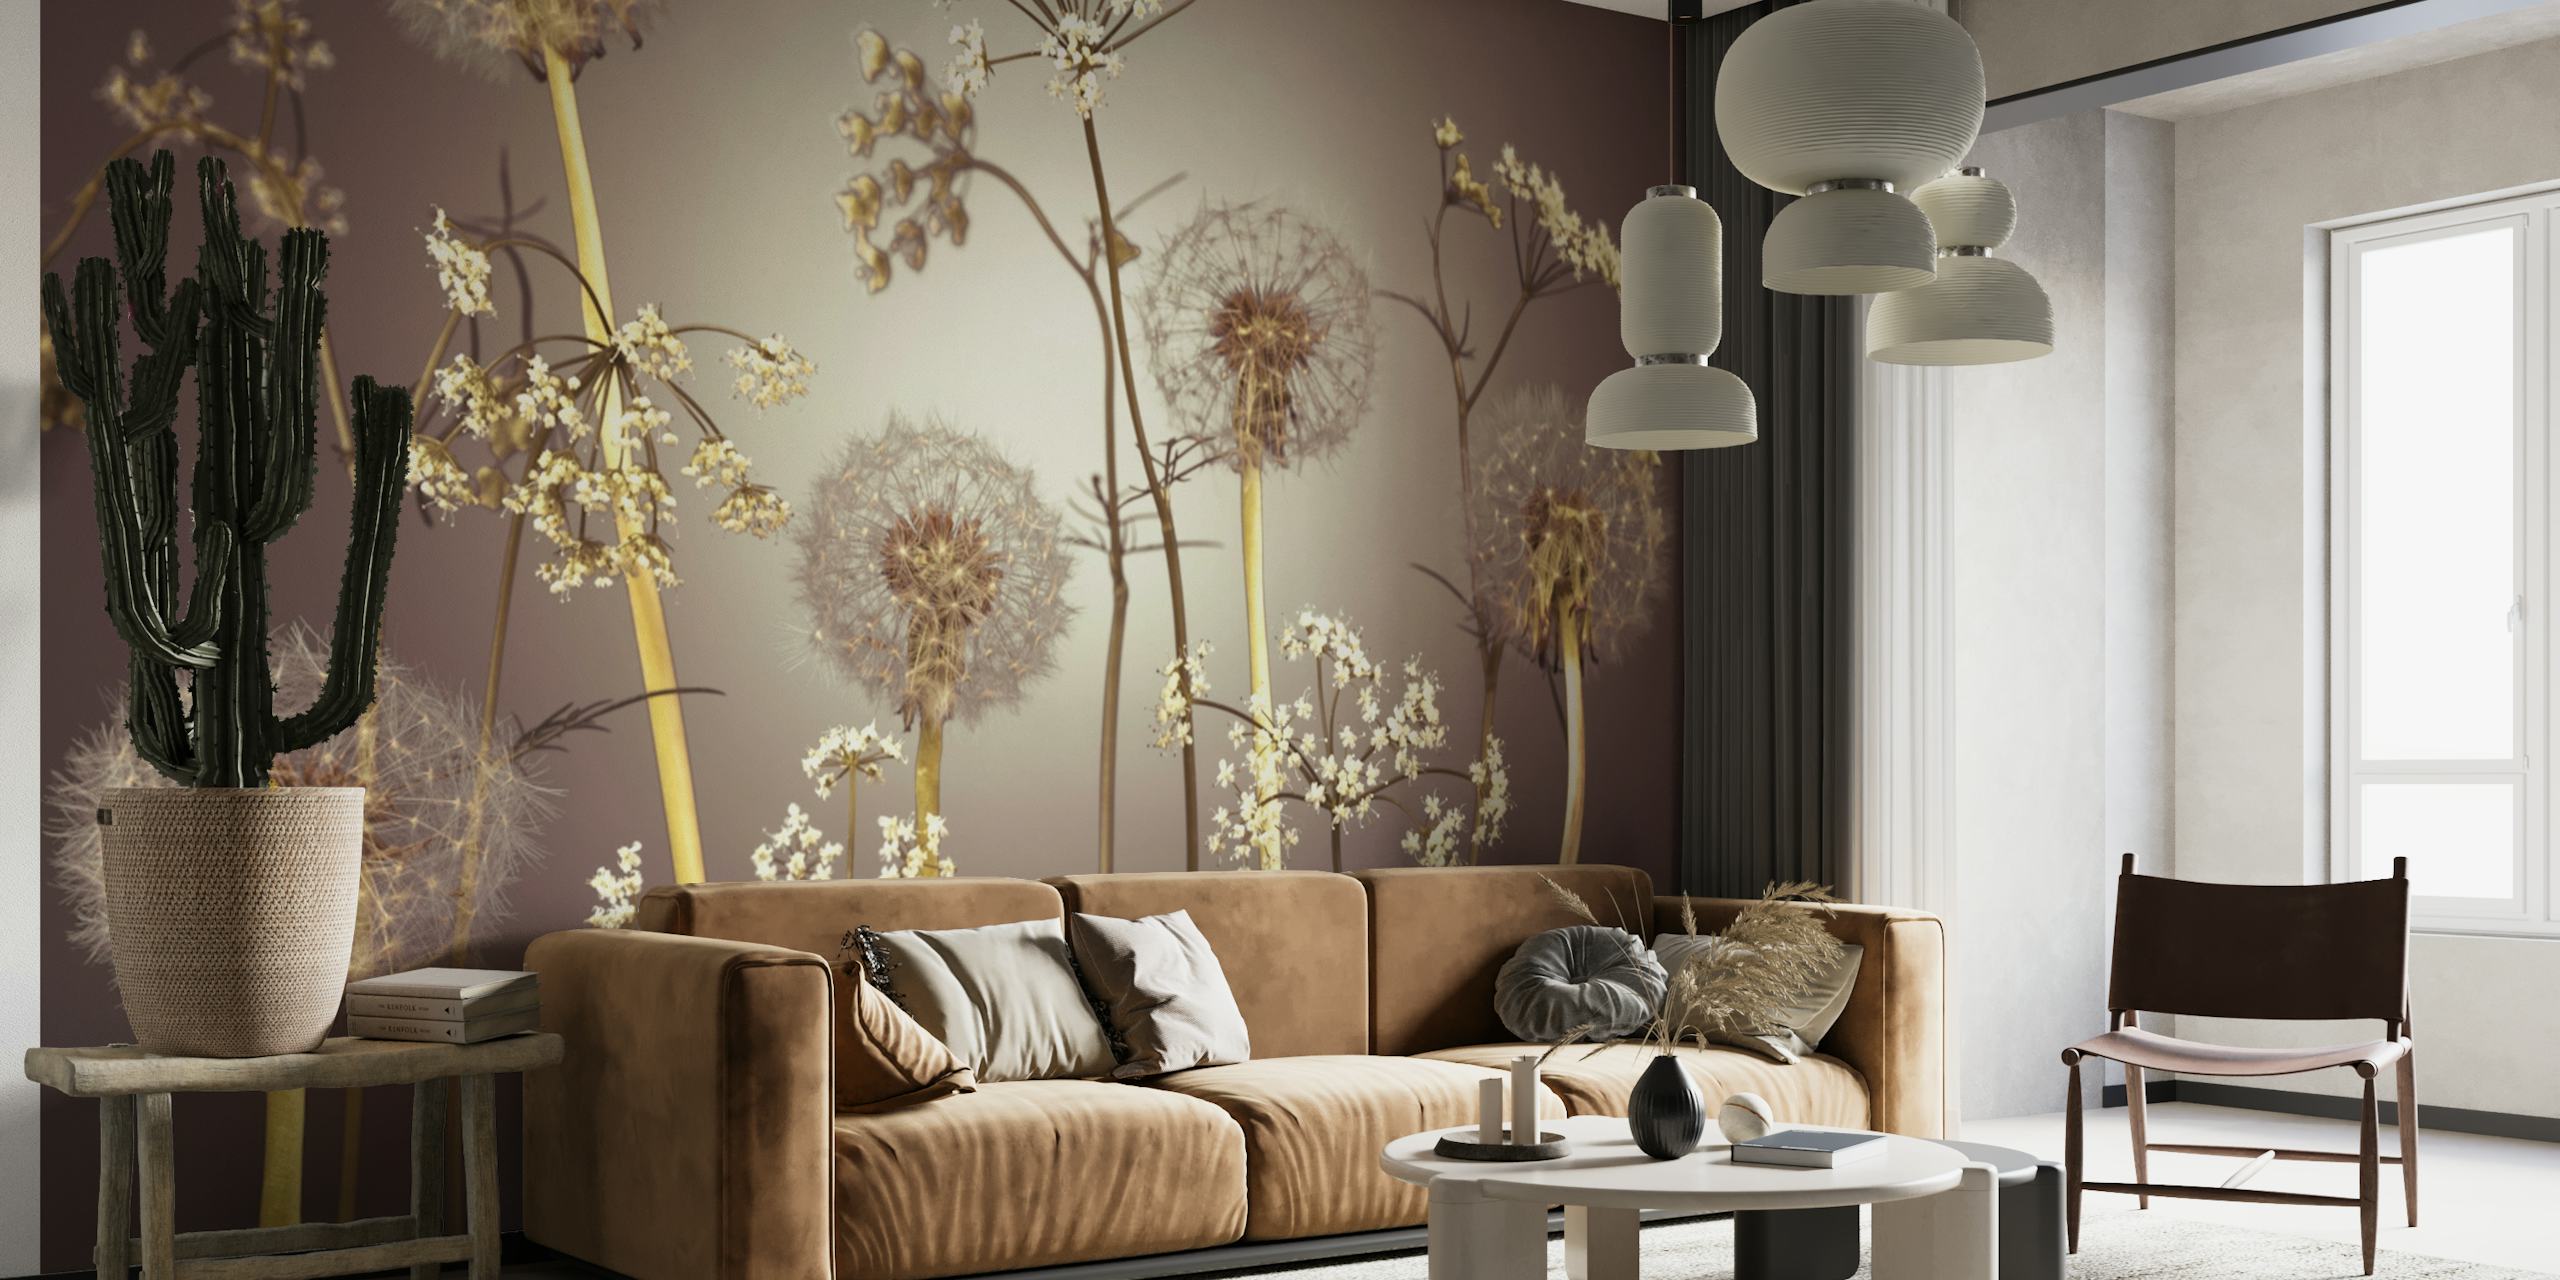 Elegant dandelions and wildflowers wall mural with neutral tones